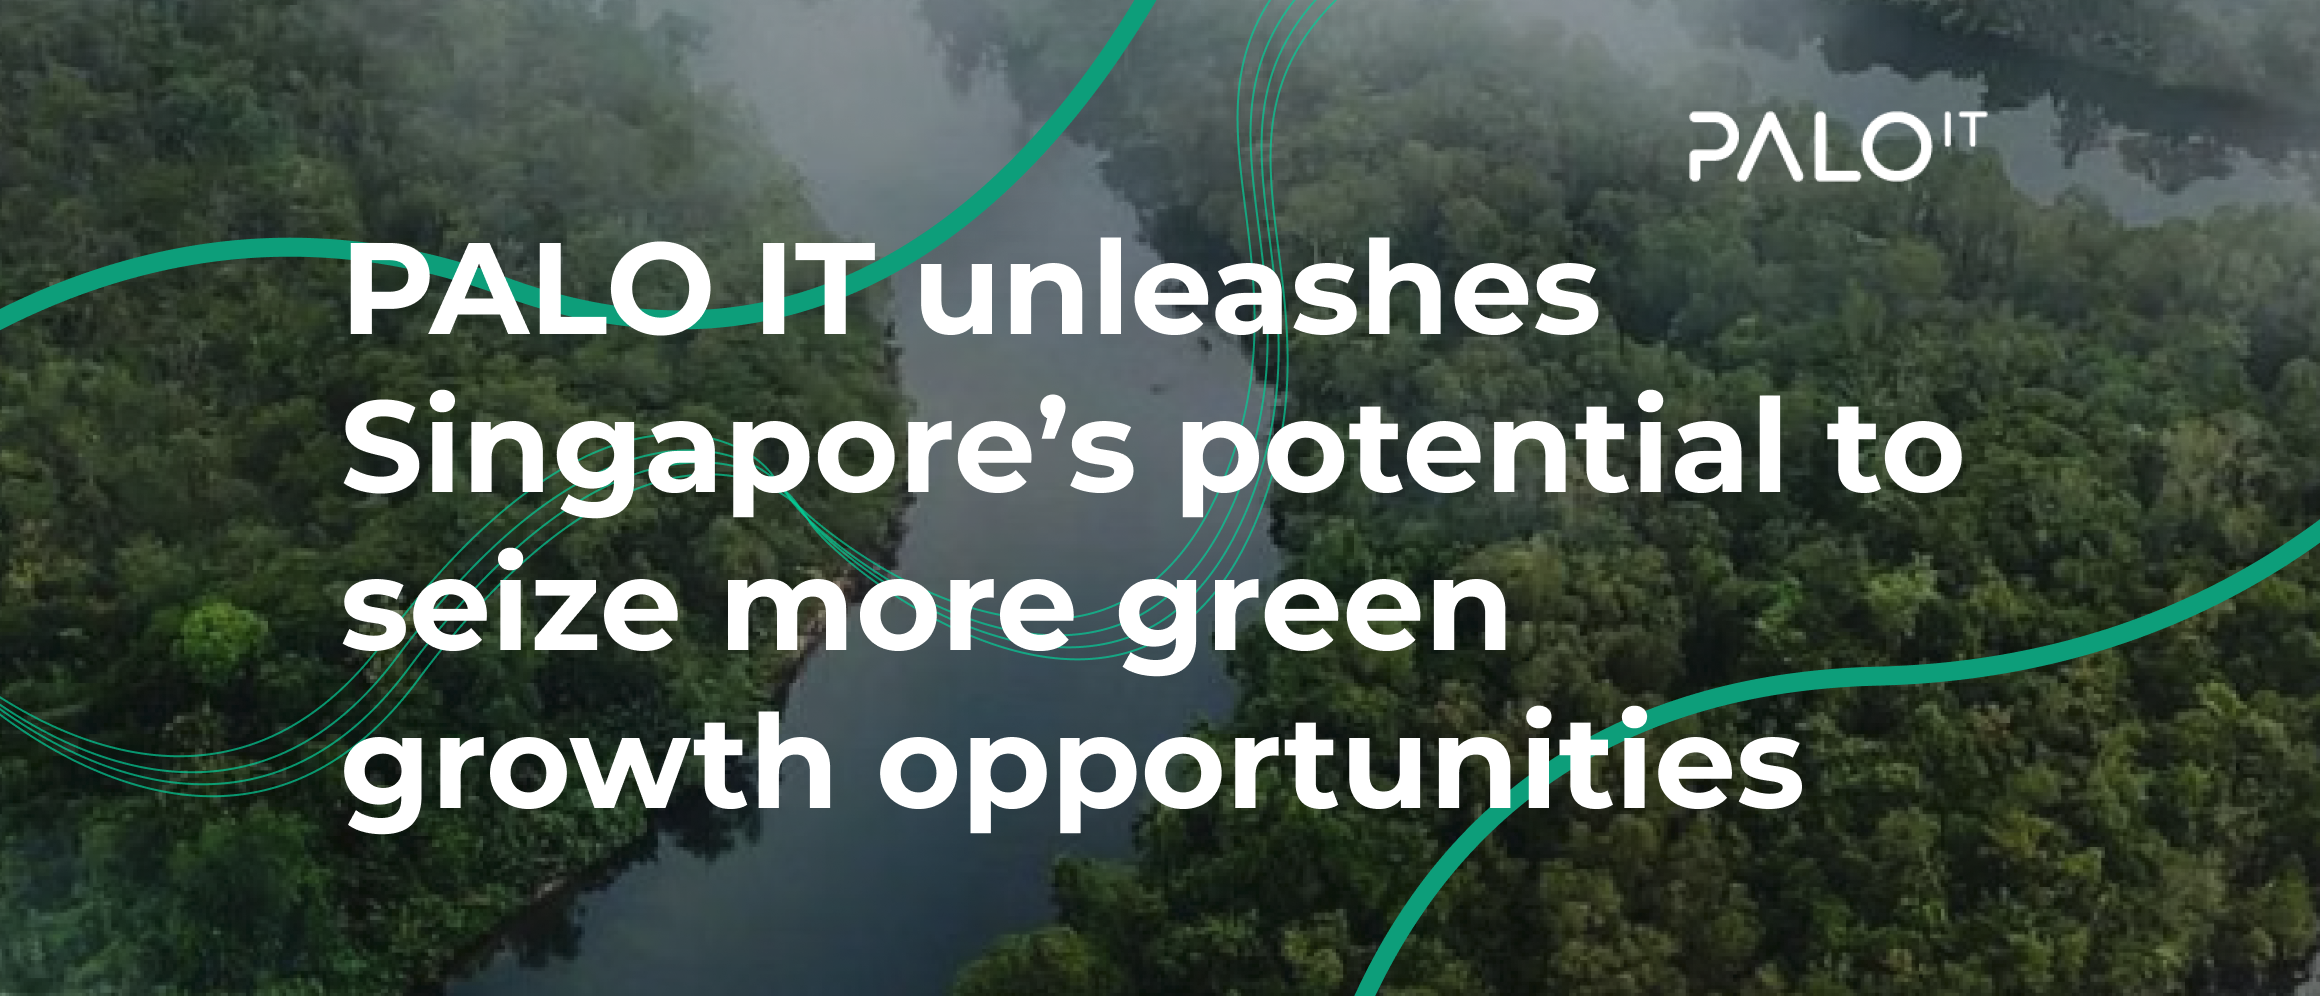 PALO IT works with CIX to seize more green growth opportunities